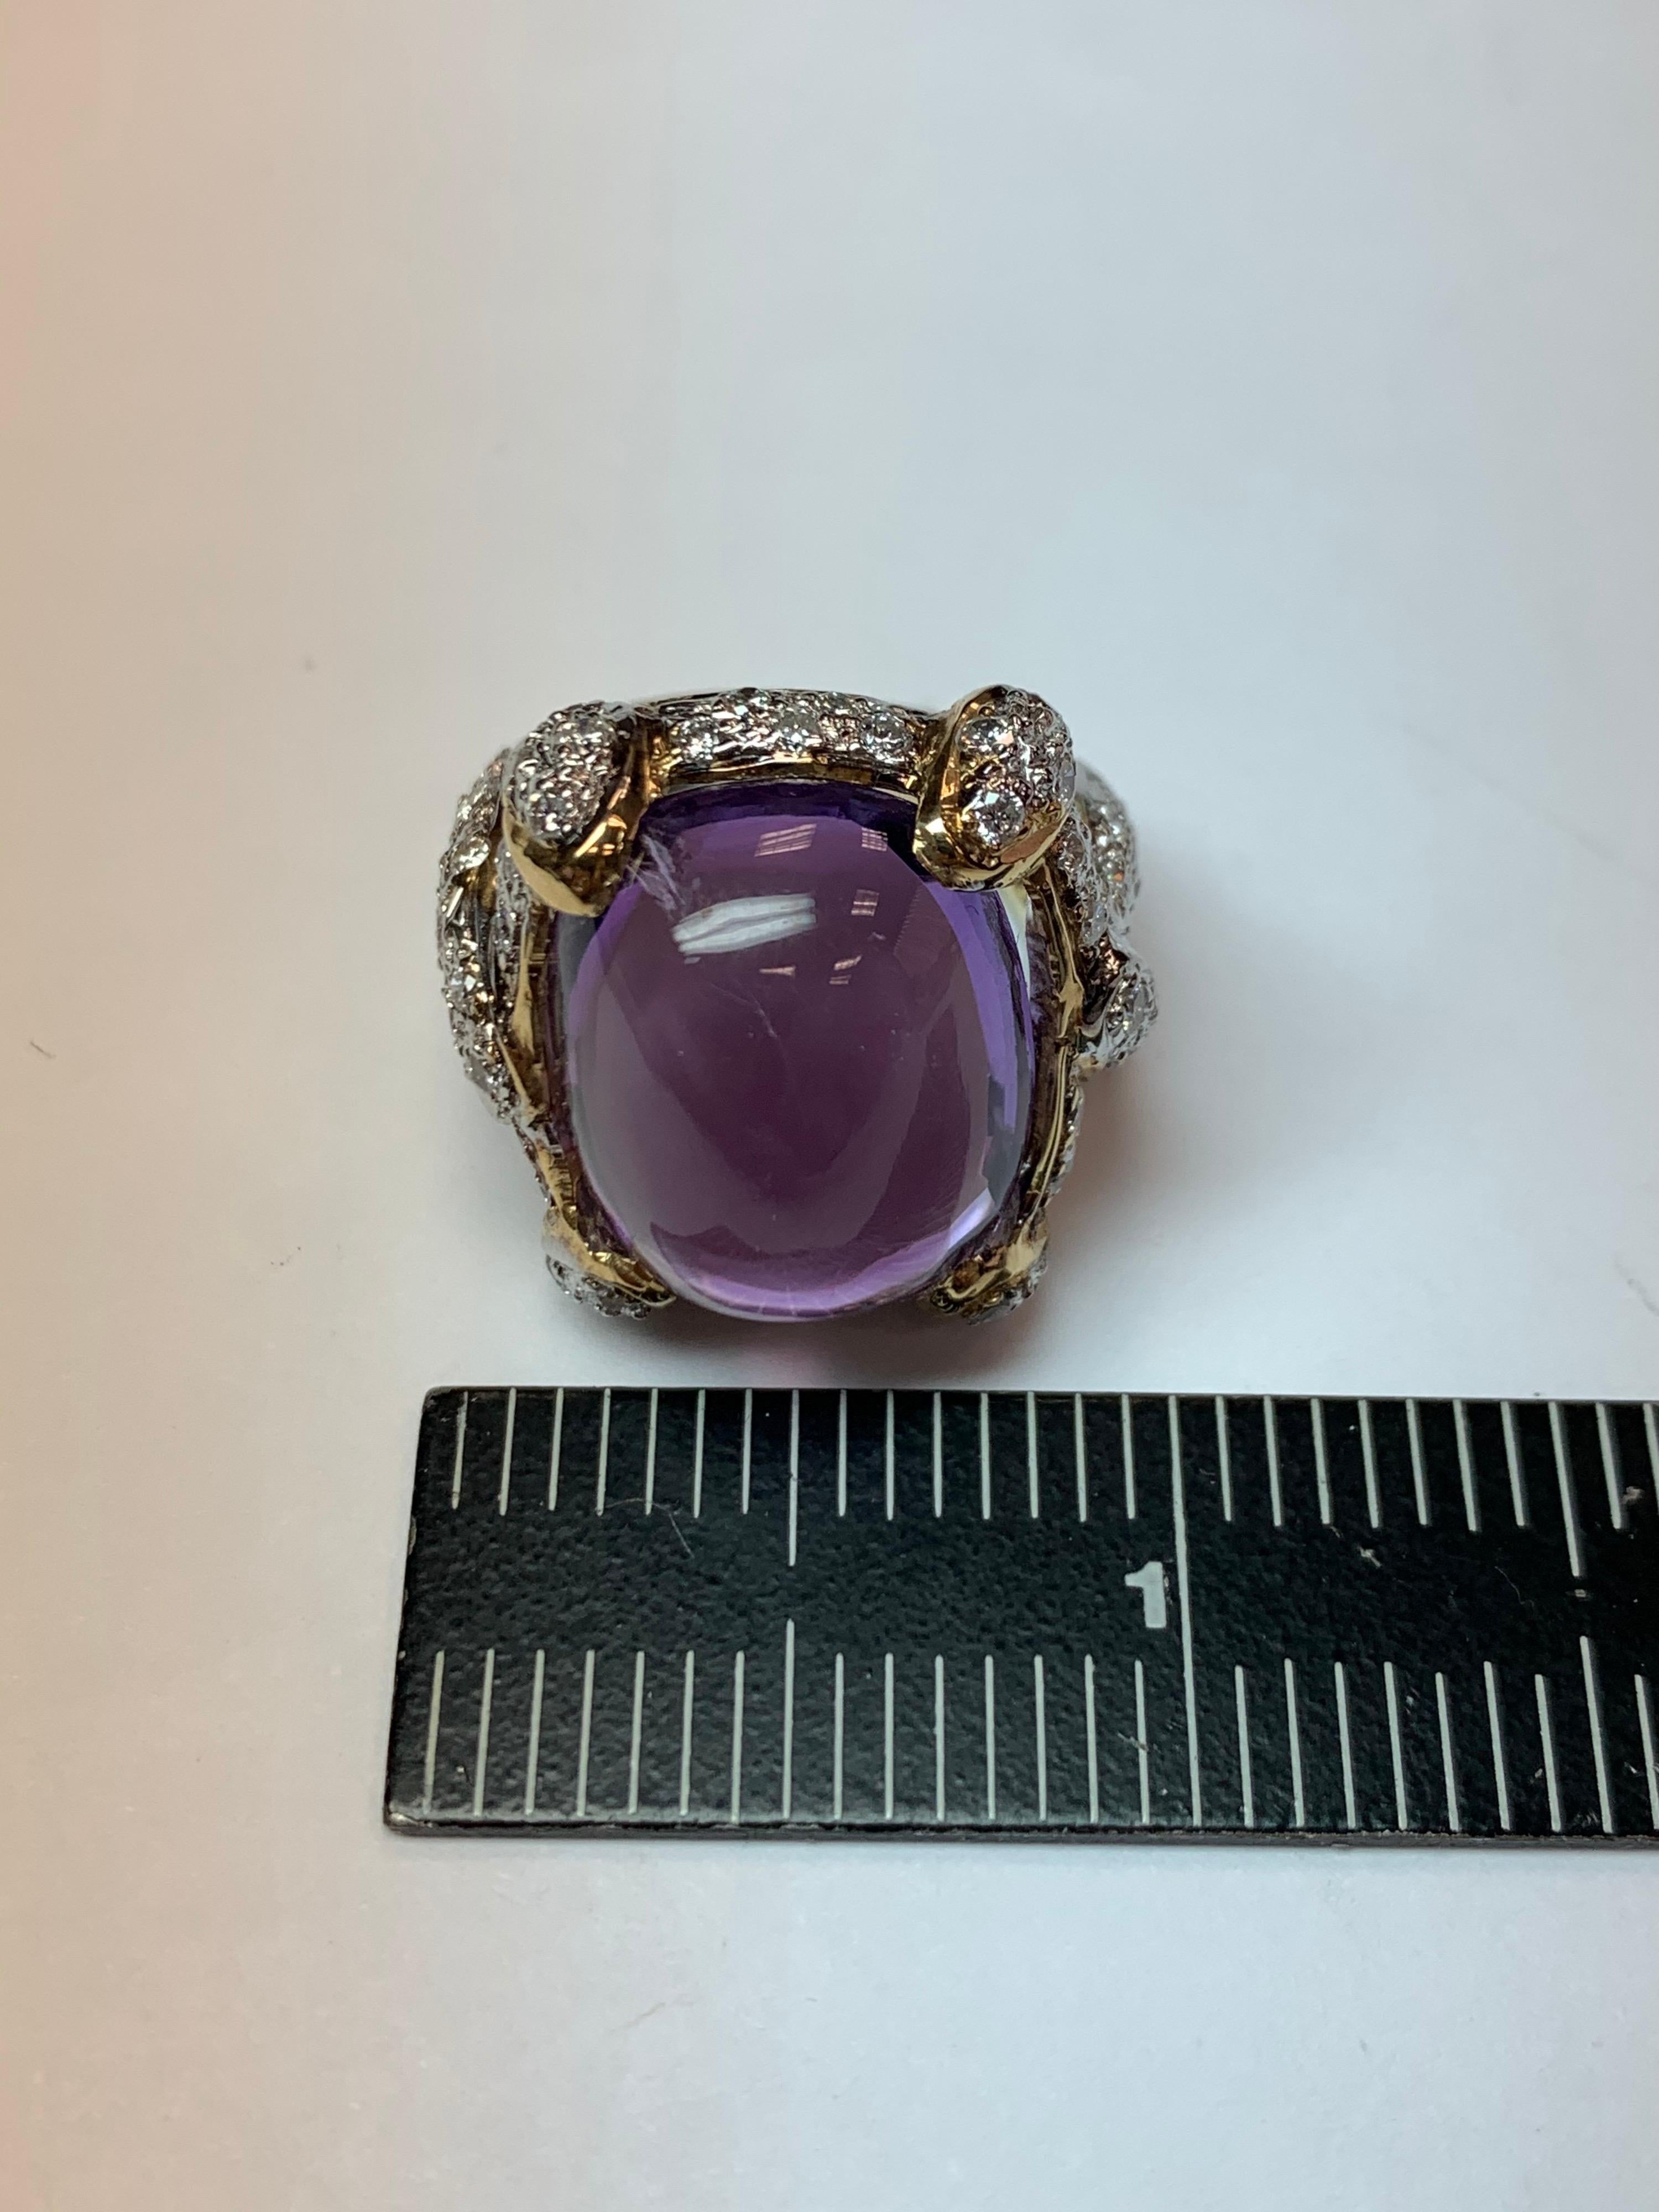 21.68 Carat Retro Gold Cocktail Ring Natural Diamond and Cab Amethyst circa 1960 For Sale 5